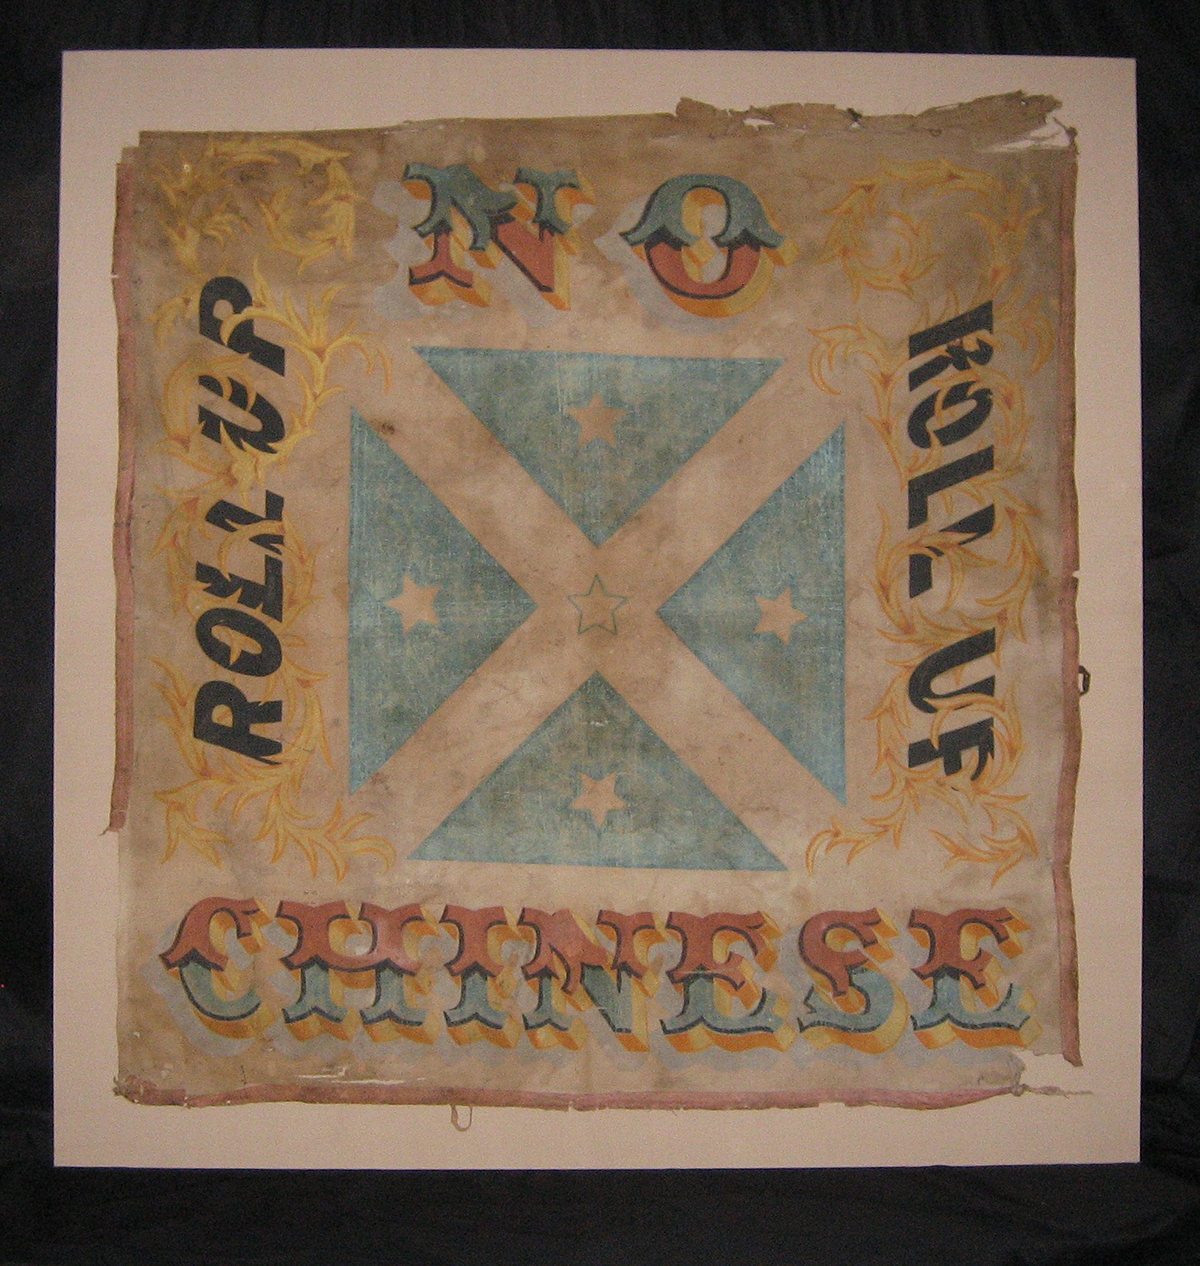 Colour scan of the Roll Up Banner used during the Lambing Flat Riots, it reads “Roll Up, Roll Up, No Chinese”.